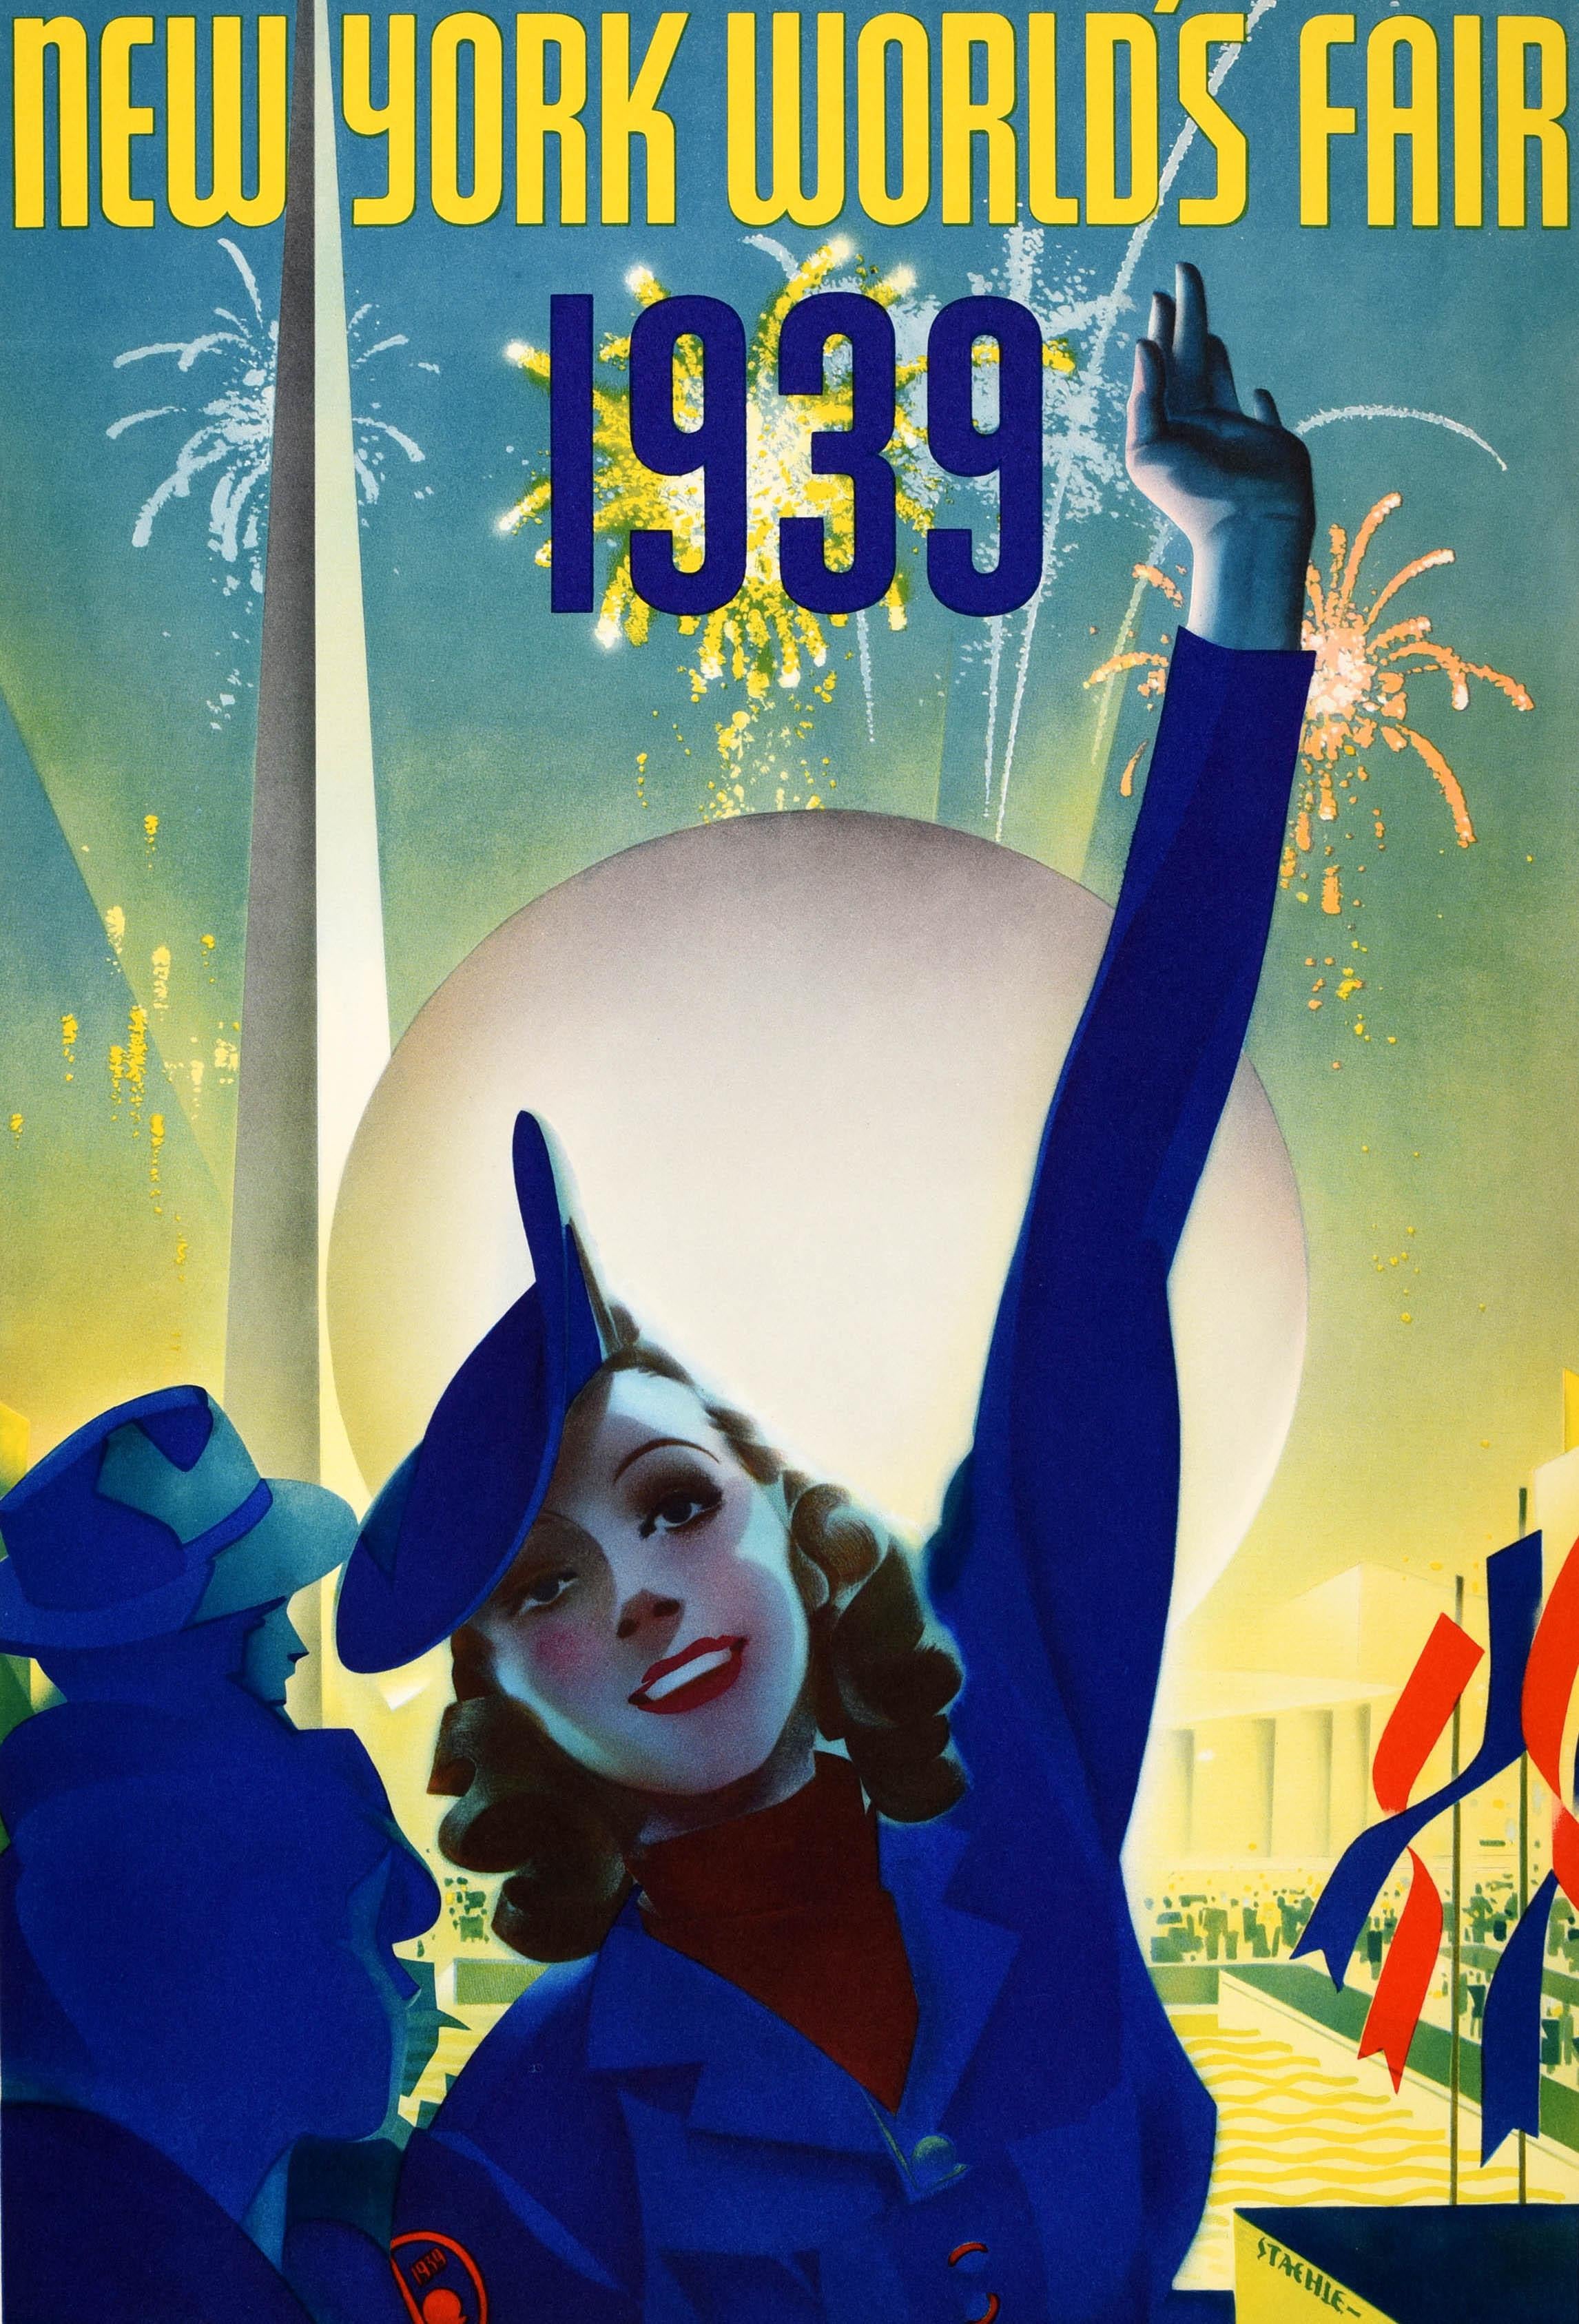 Original vintage poster for the World Fair held in New York at Flushing Meadows-Corona Park from 30 April 1939 to 31 October 1940. Great Art Deco design of a smiling young lady wearing a stylish hat and holding up one arm in front of a firework